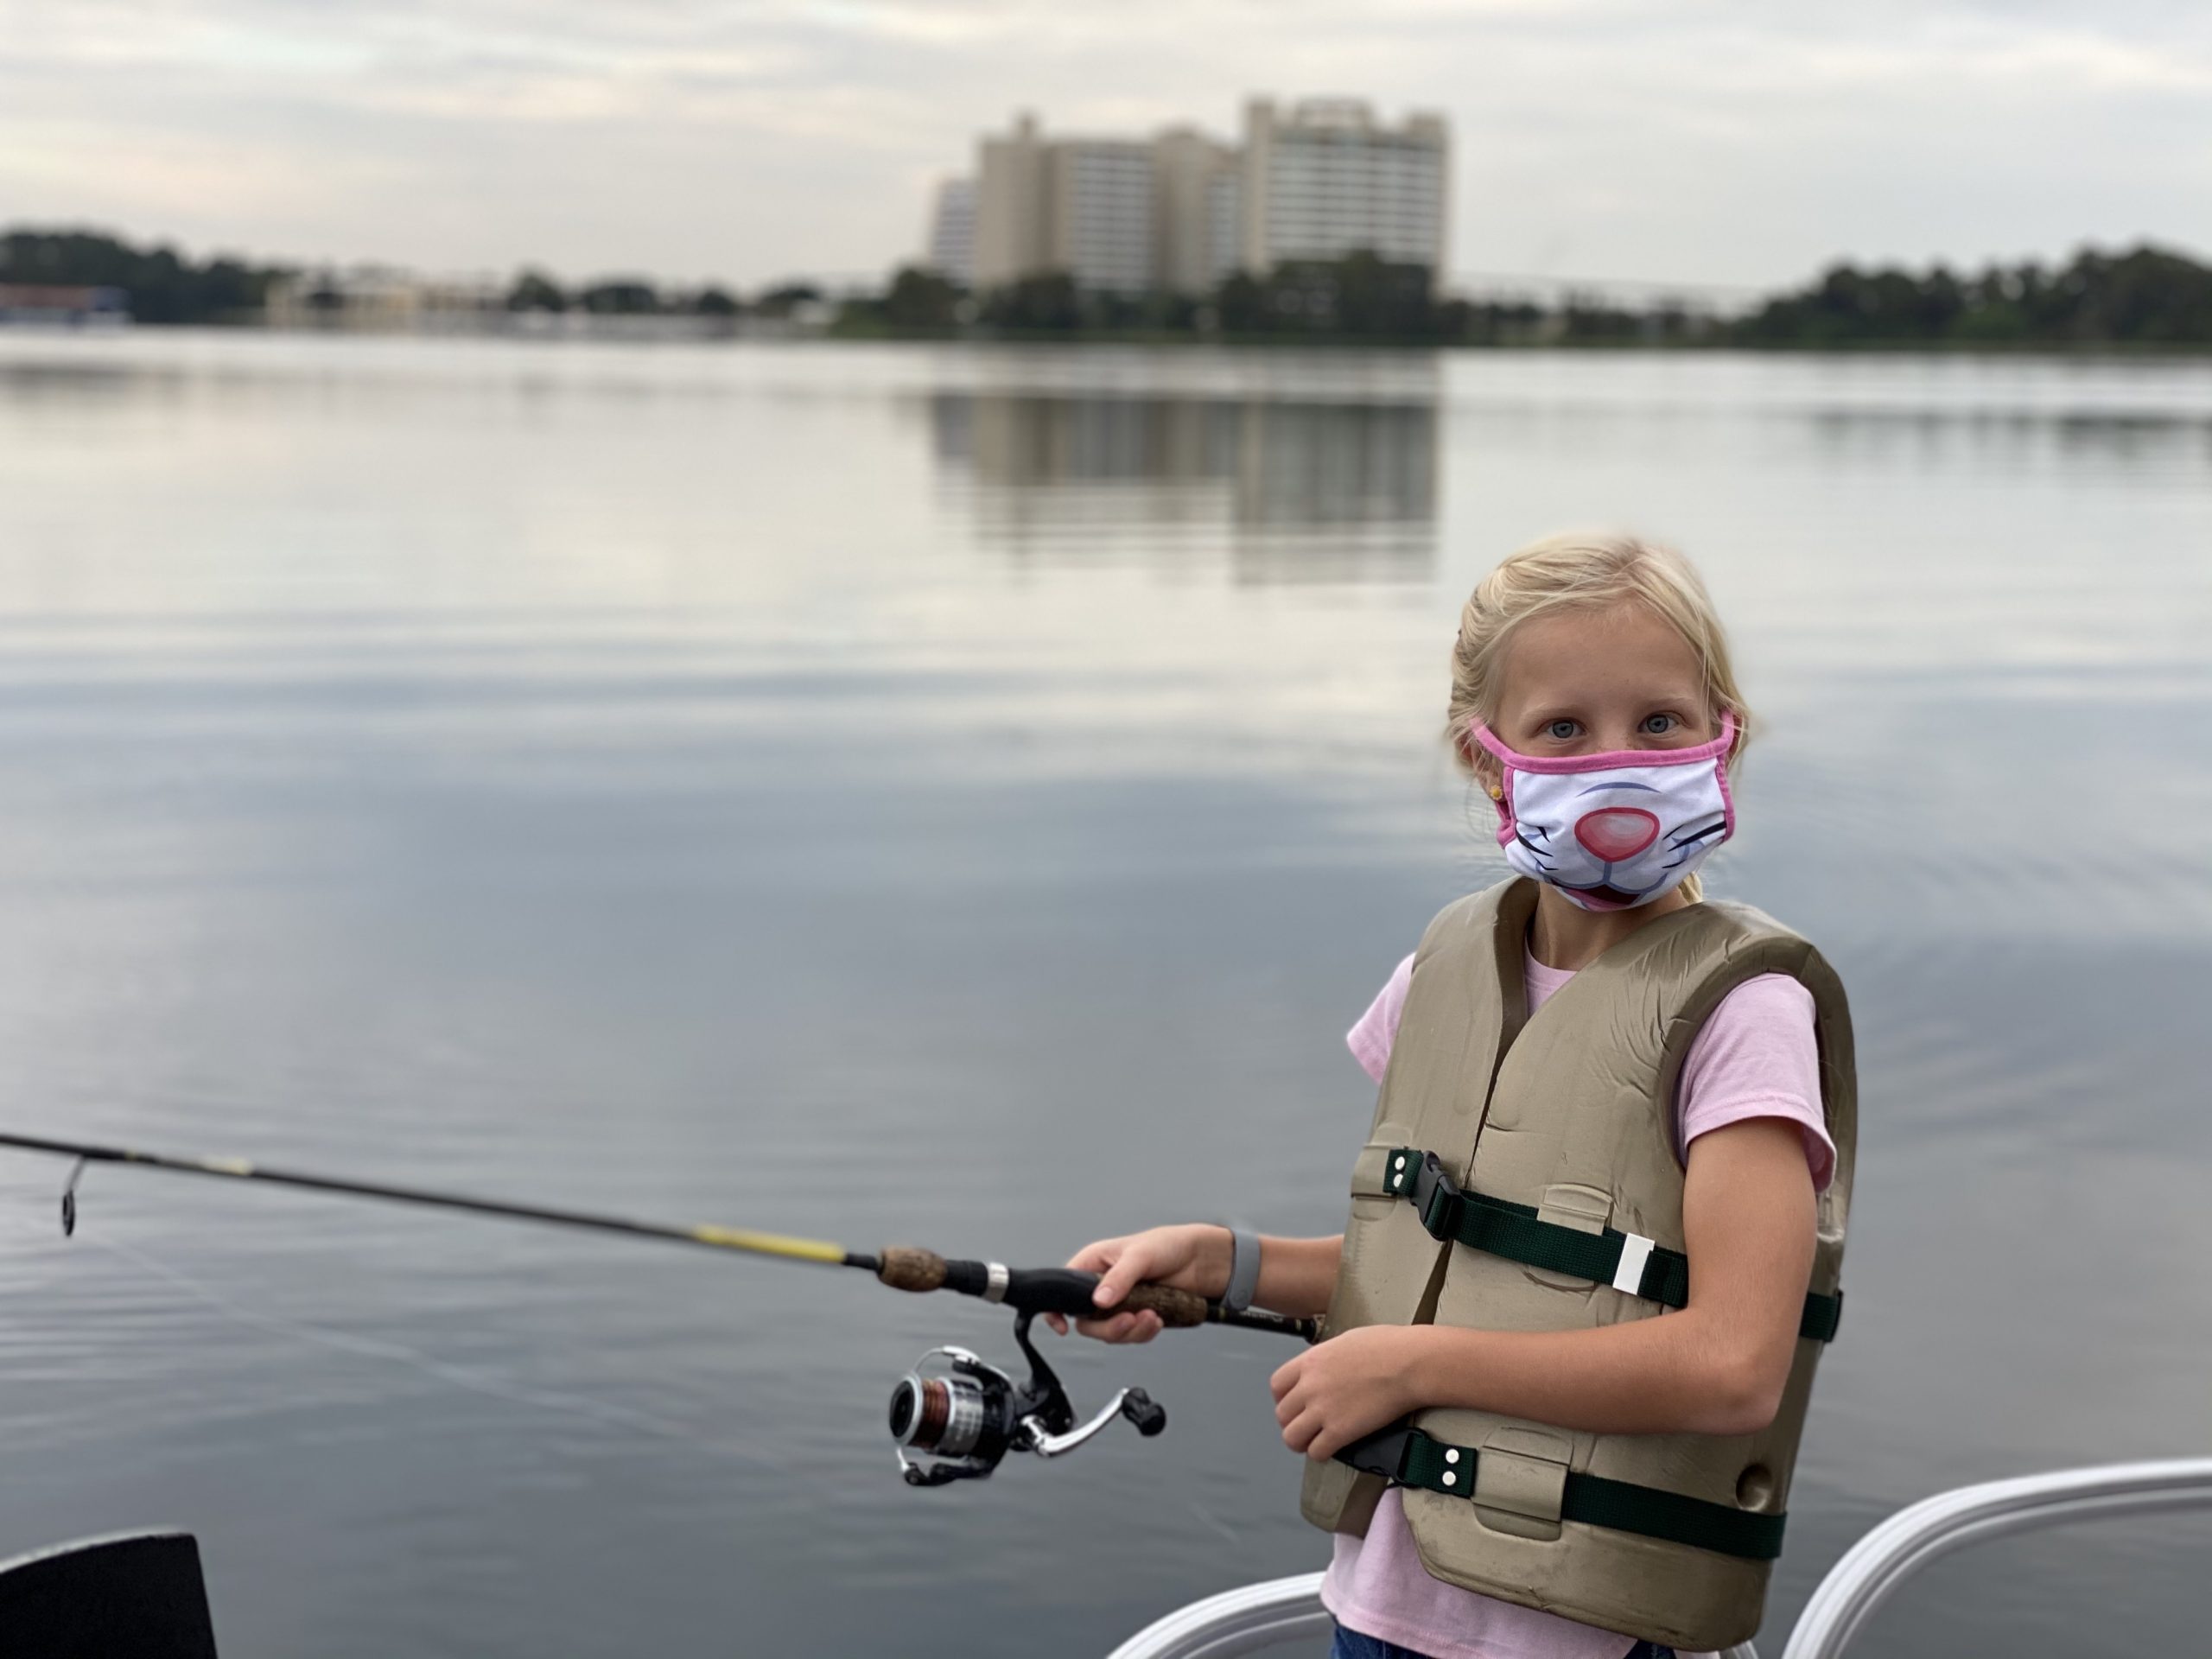 Fishing at Disney World: Details and Review - Amber Likes